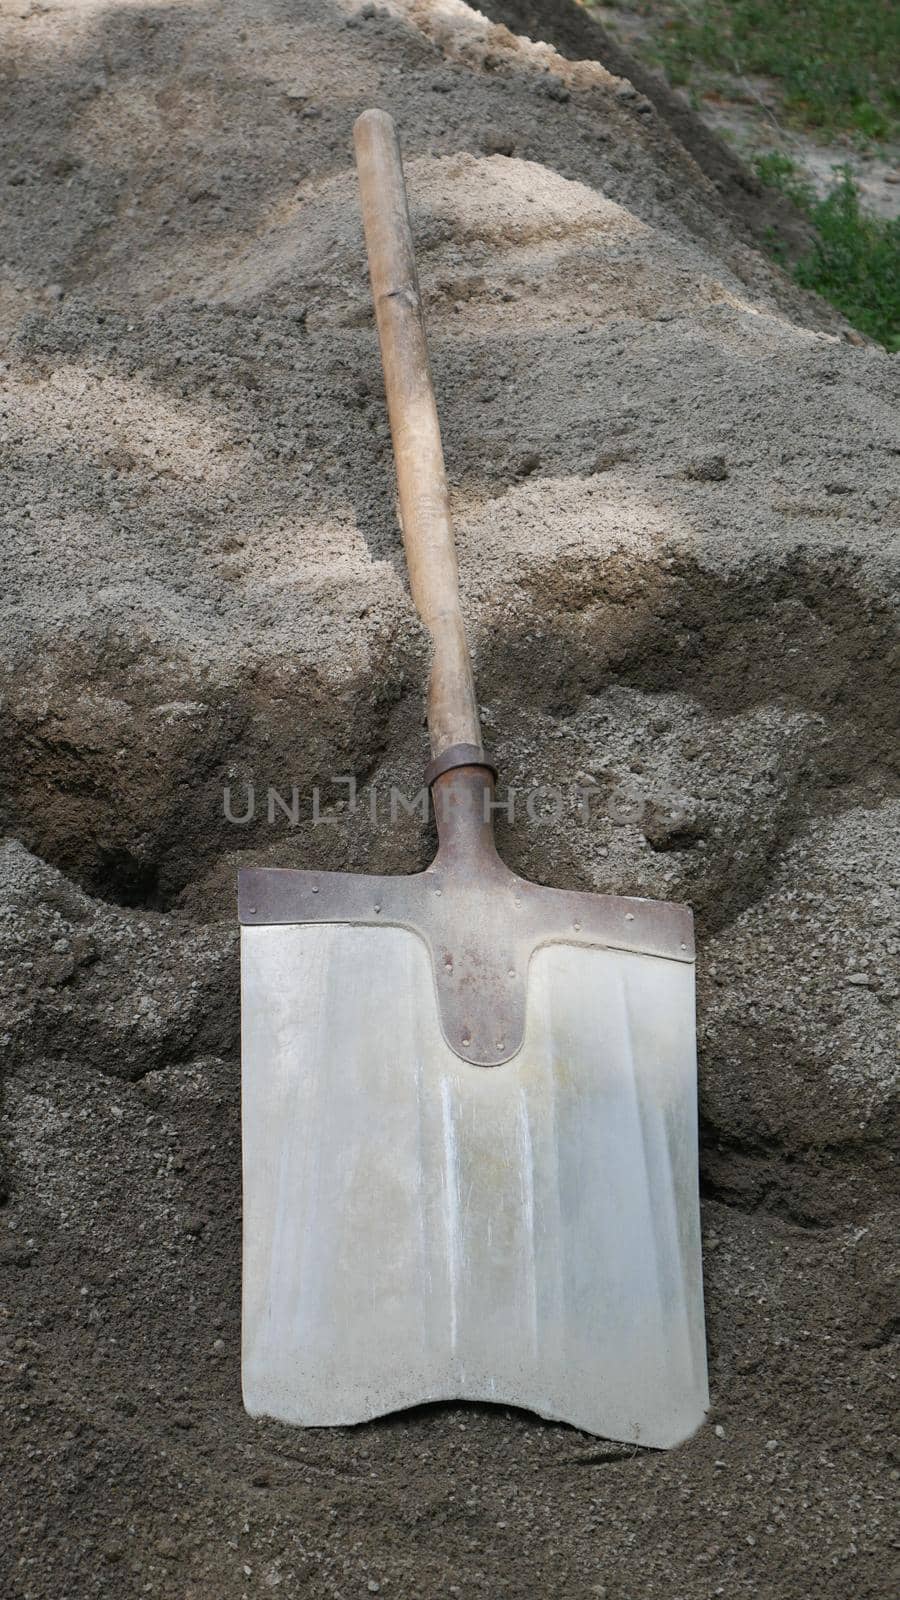 The shovel for dripping is lying on the pile of dry concrete or cement, construction and development concept by balinska_lv